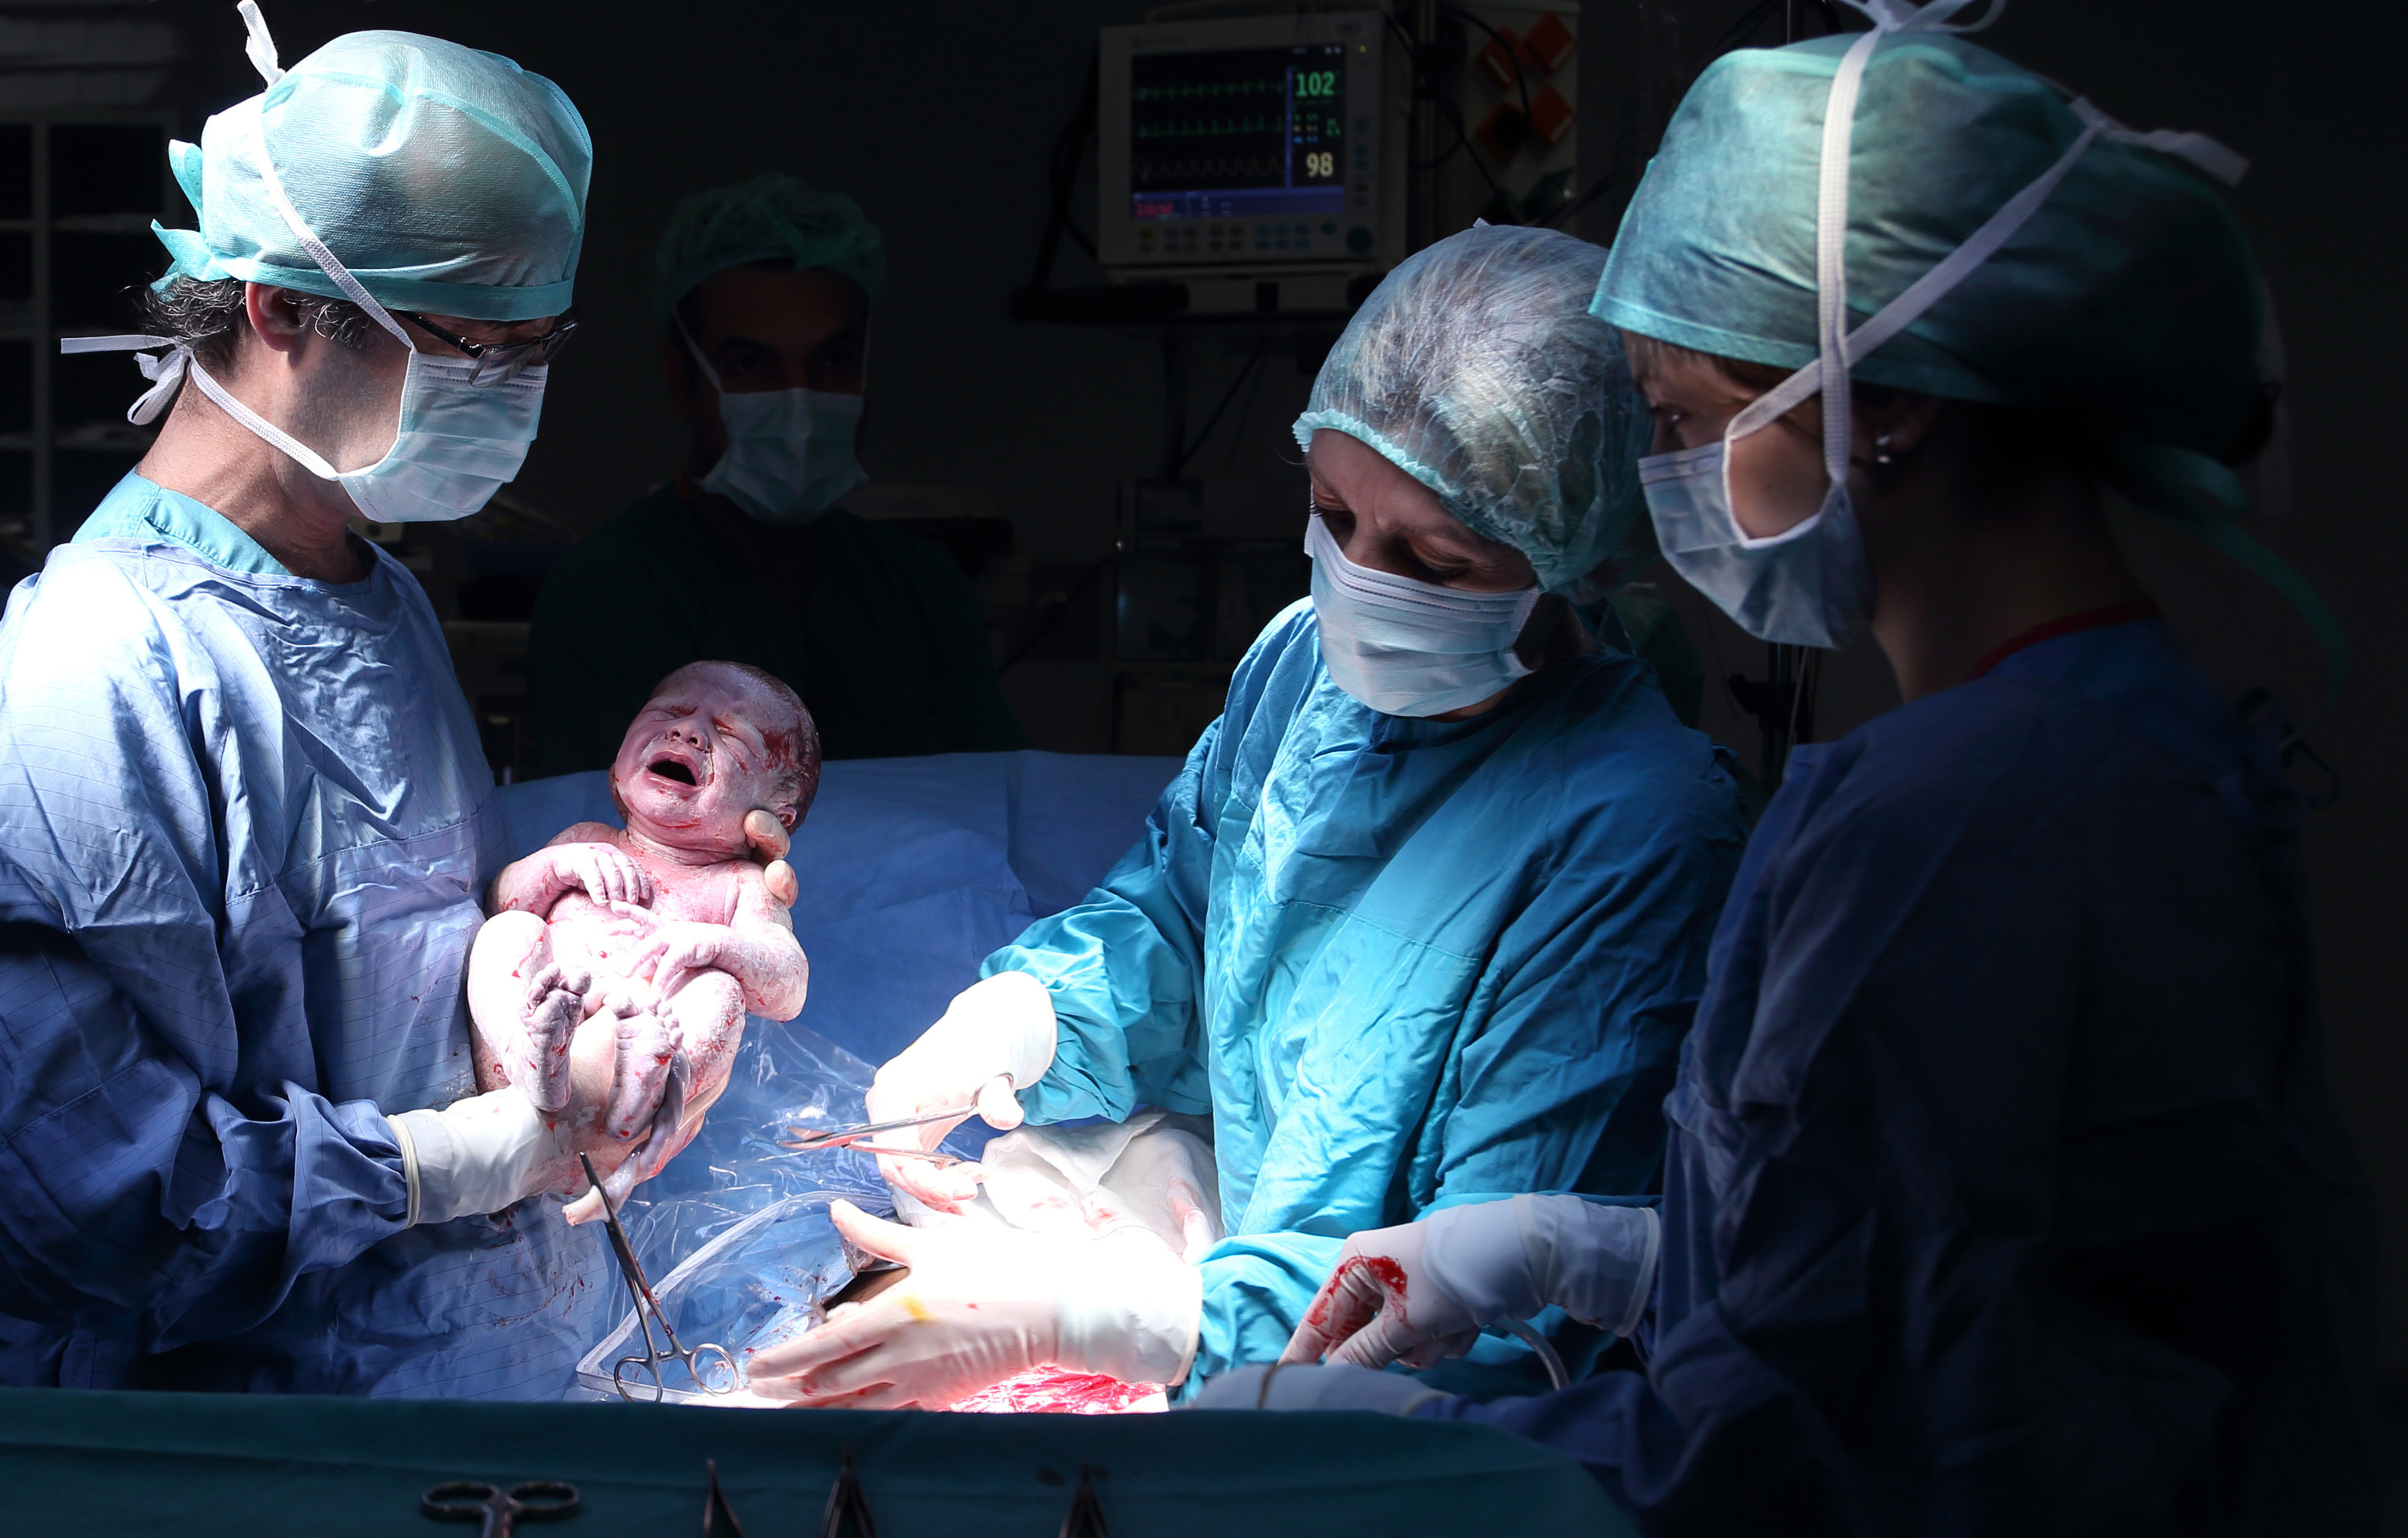 A newborn baby being held by a doctor and surgeons operating